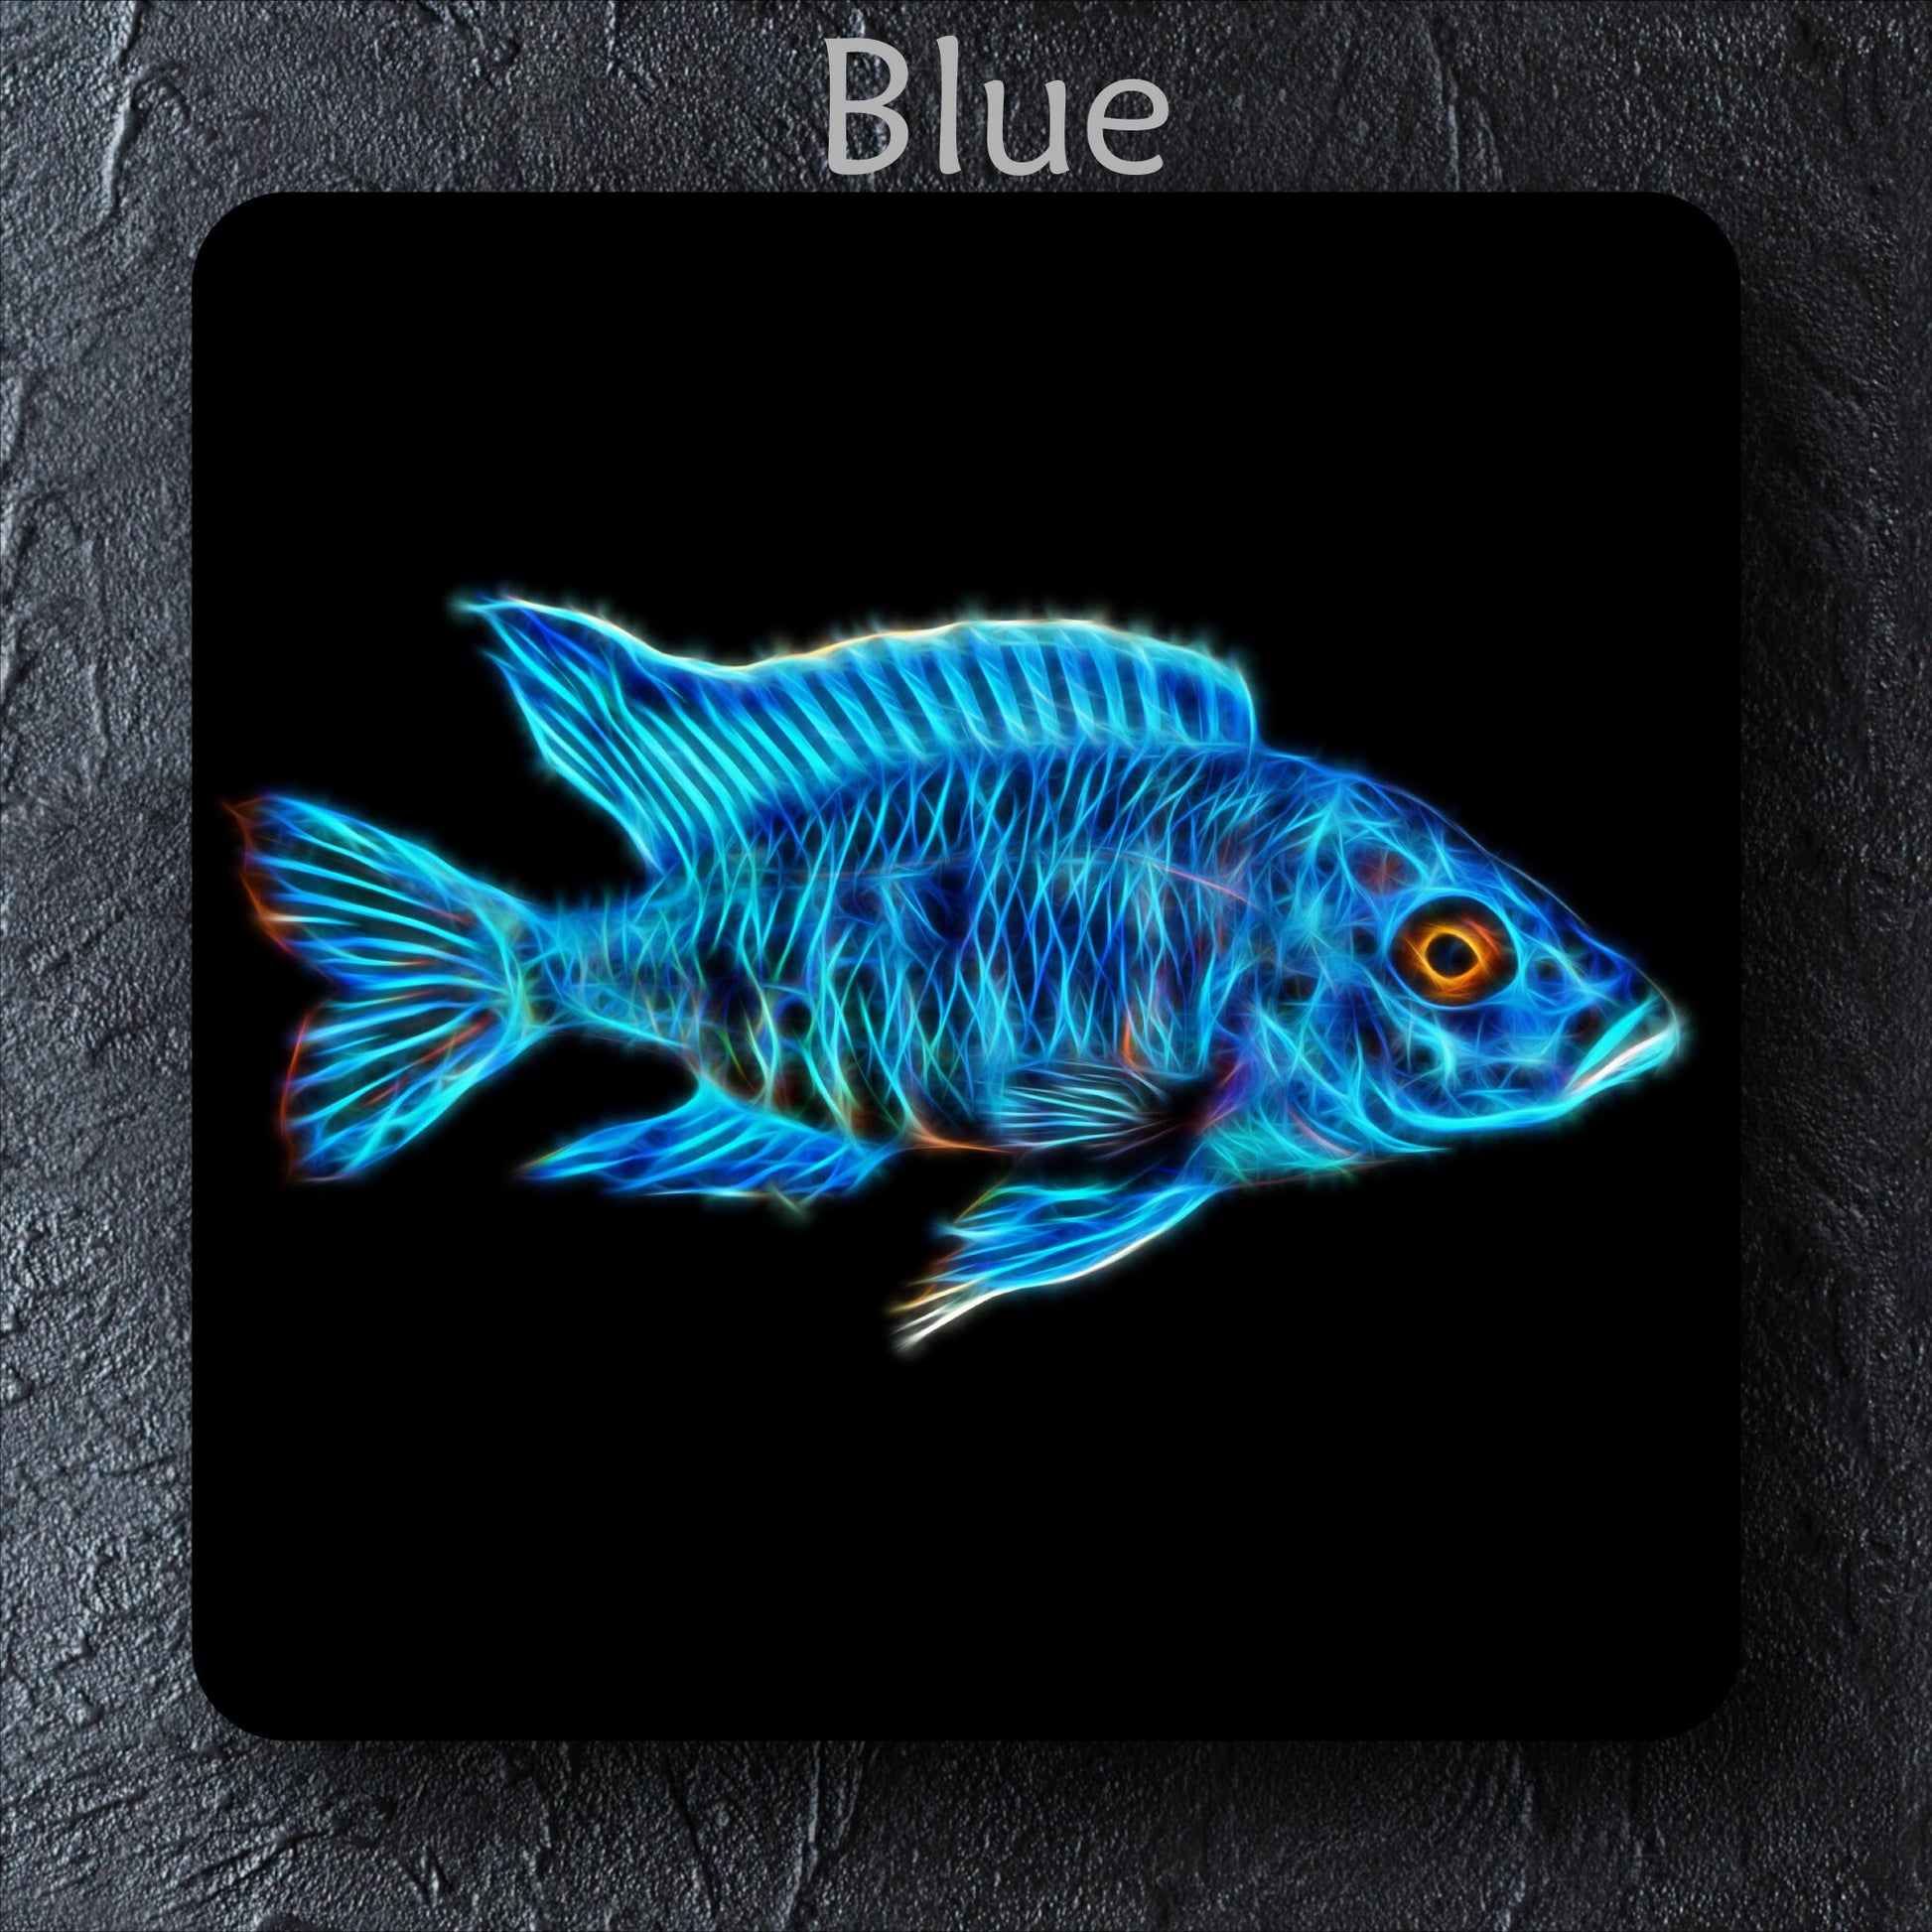 Peacock Cichlid Coaster with Stunning Fractal Art Design. Choose One of 12 Aulonocara Designs